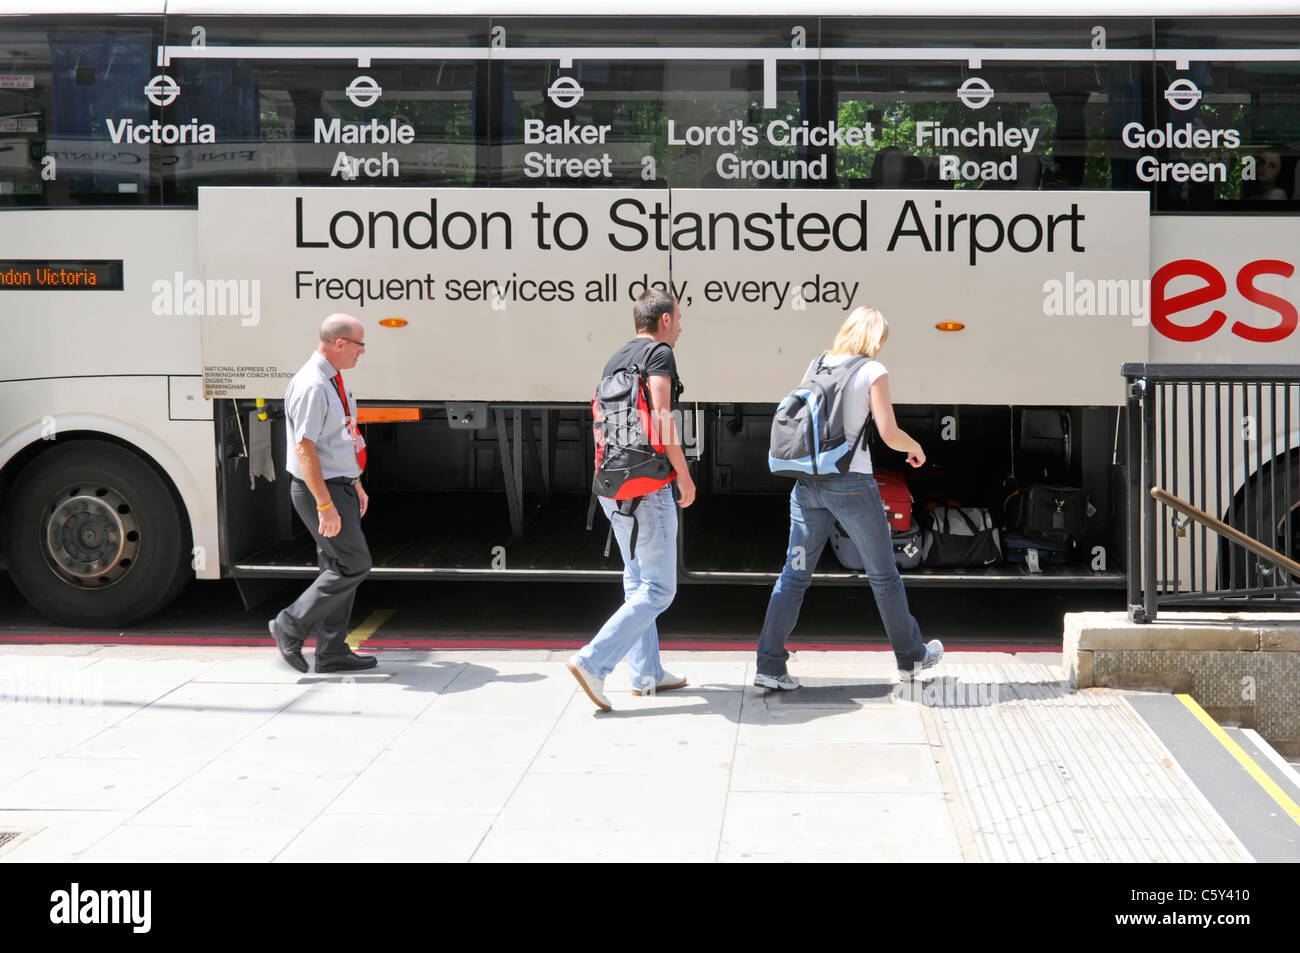 National Express public transport coach driver supervises passengers  collecting luggage suitcases arrival at London from Stansted airport  England UK Stock Photo - Alamy